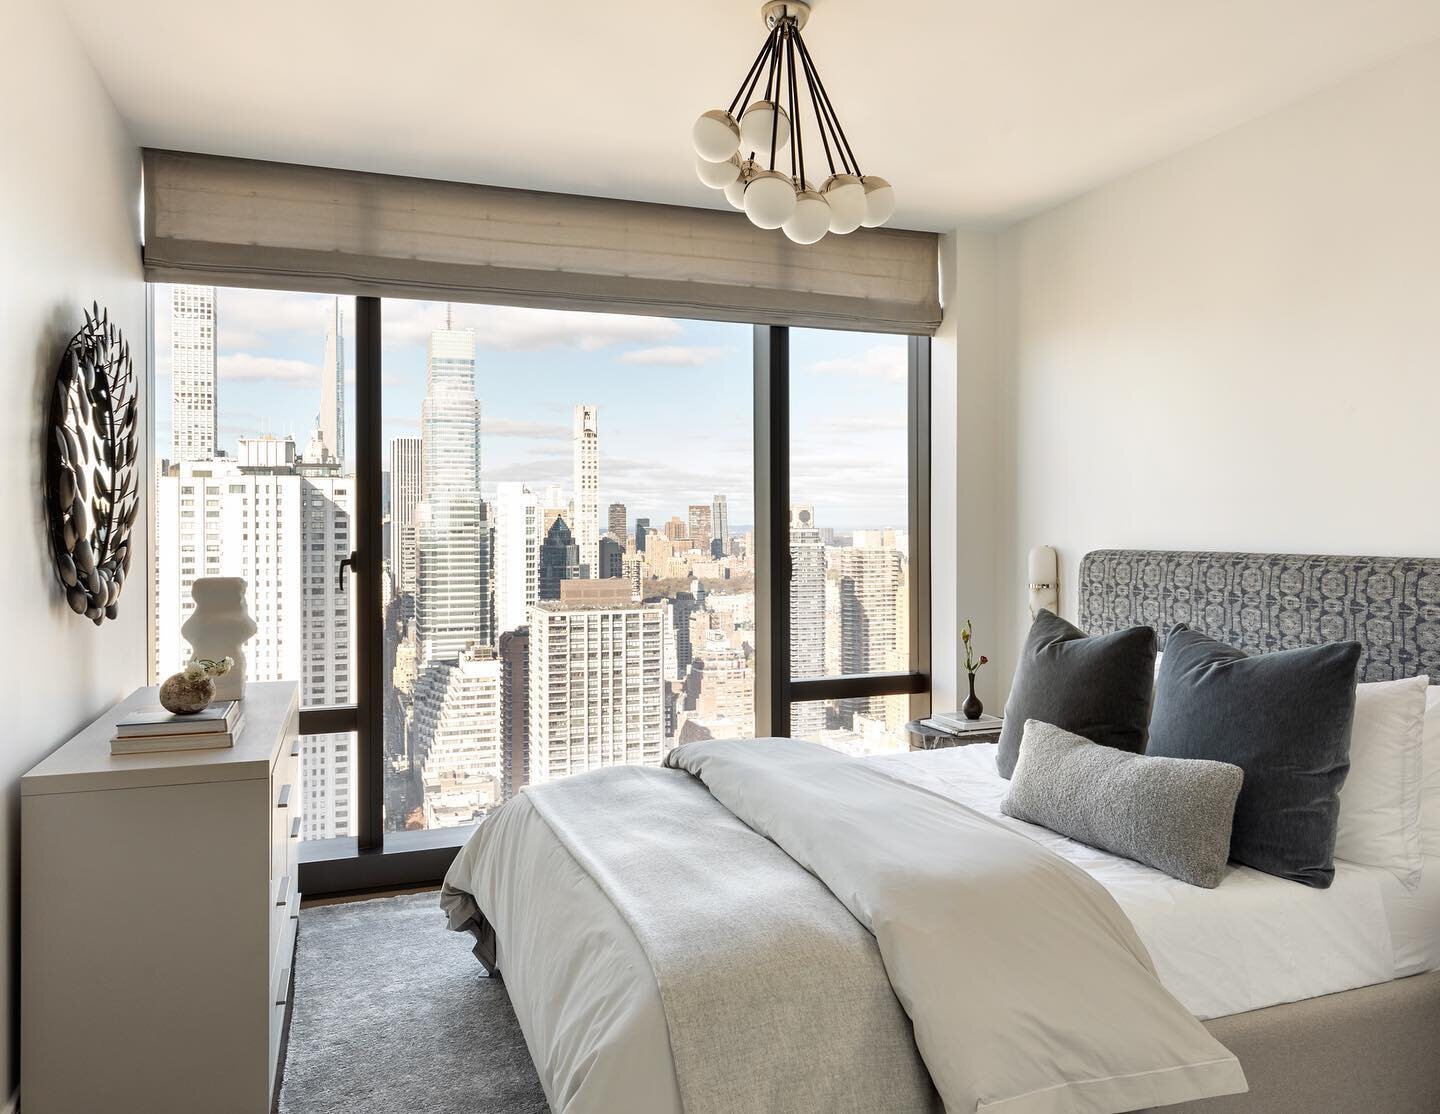 Good morning NYC - let&rsquo;s do this 2023!
Guest bedroom from our @suttontower project
Photo @reganwoodphoto 
Design @amykalikowdesign 

#bedroom #views #vintage #custom #interiordesign #designer #moderndesign #cozy #nyc